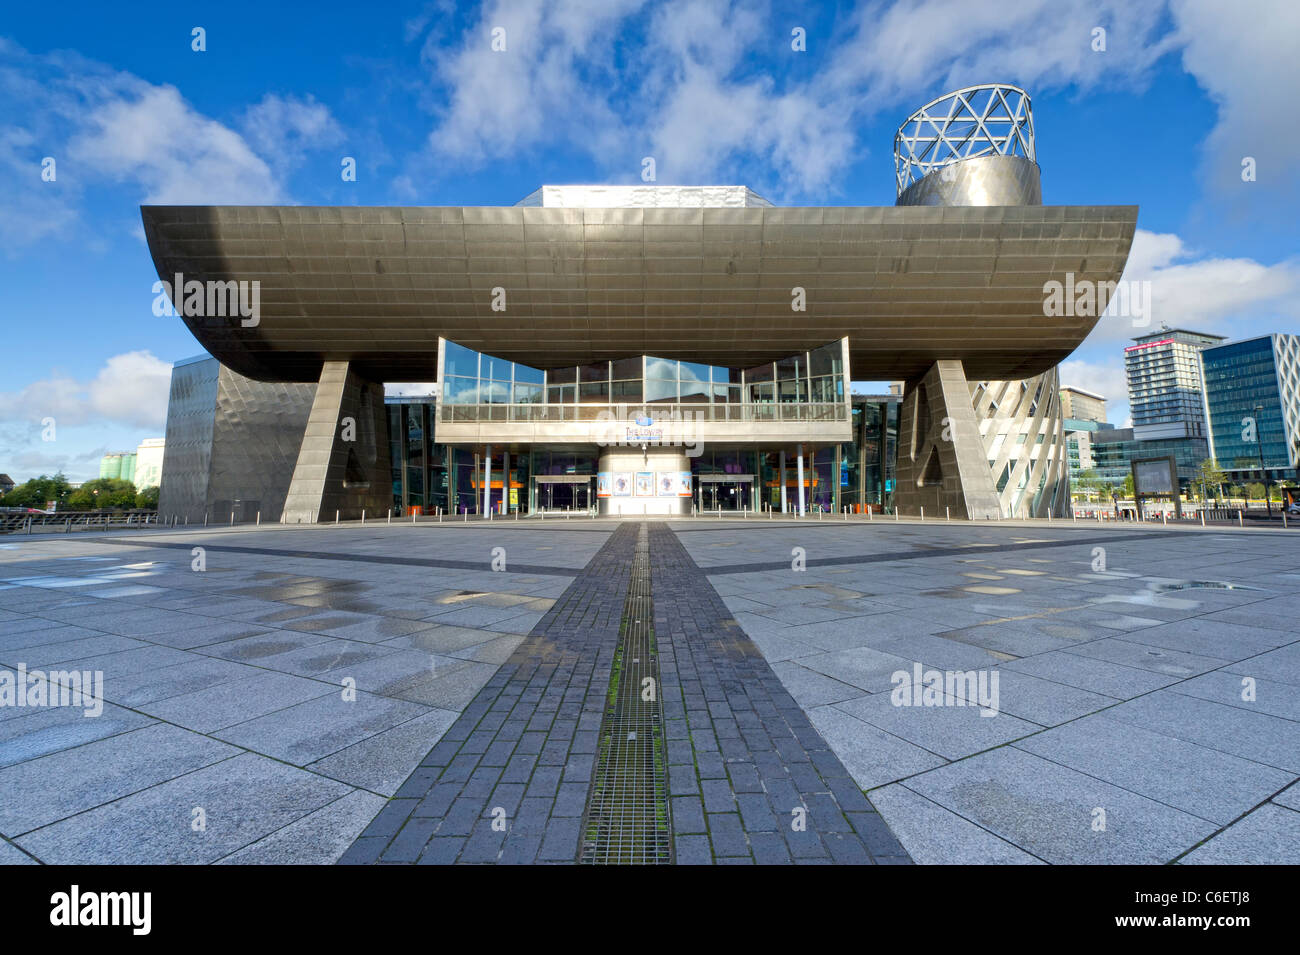 The Lowry Theatre complex in Salford Quays near Manchester, England Stock Photo